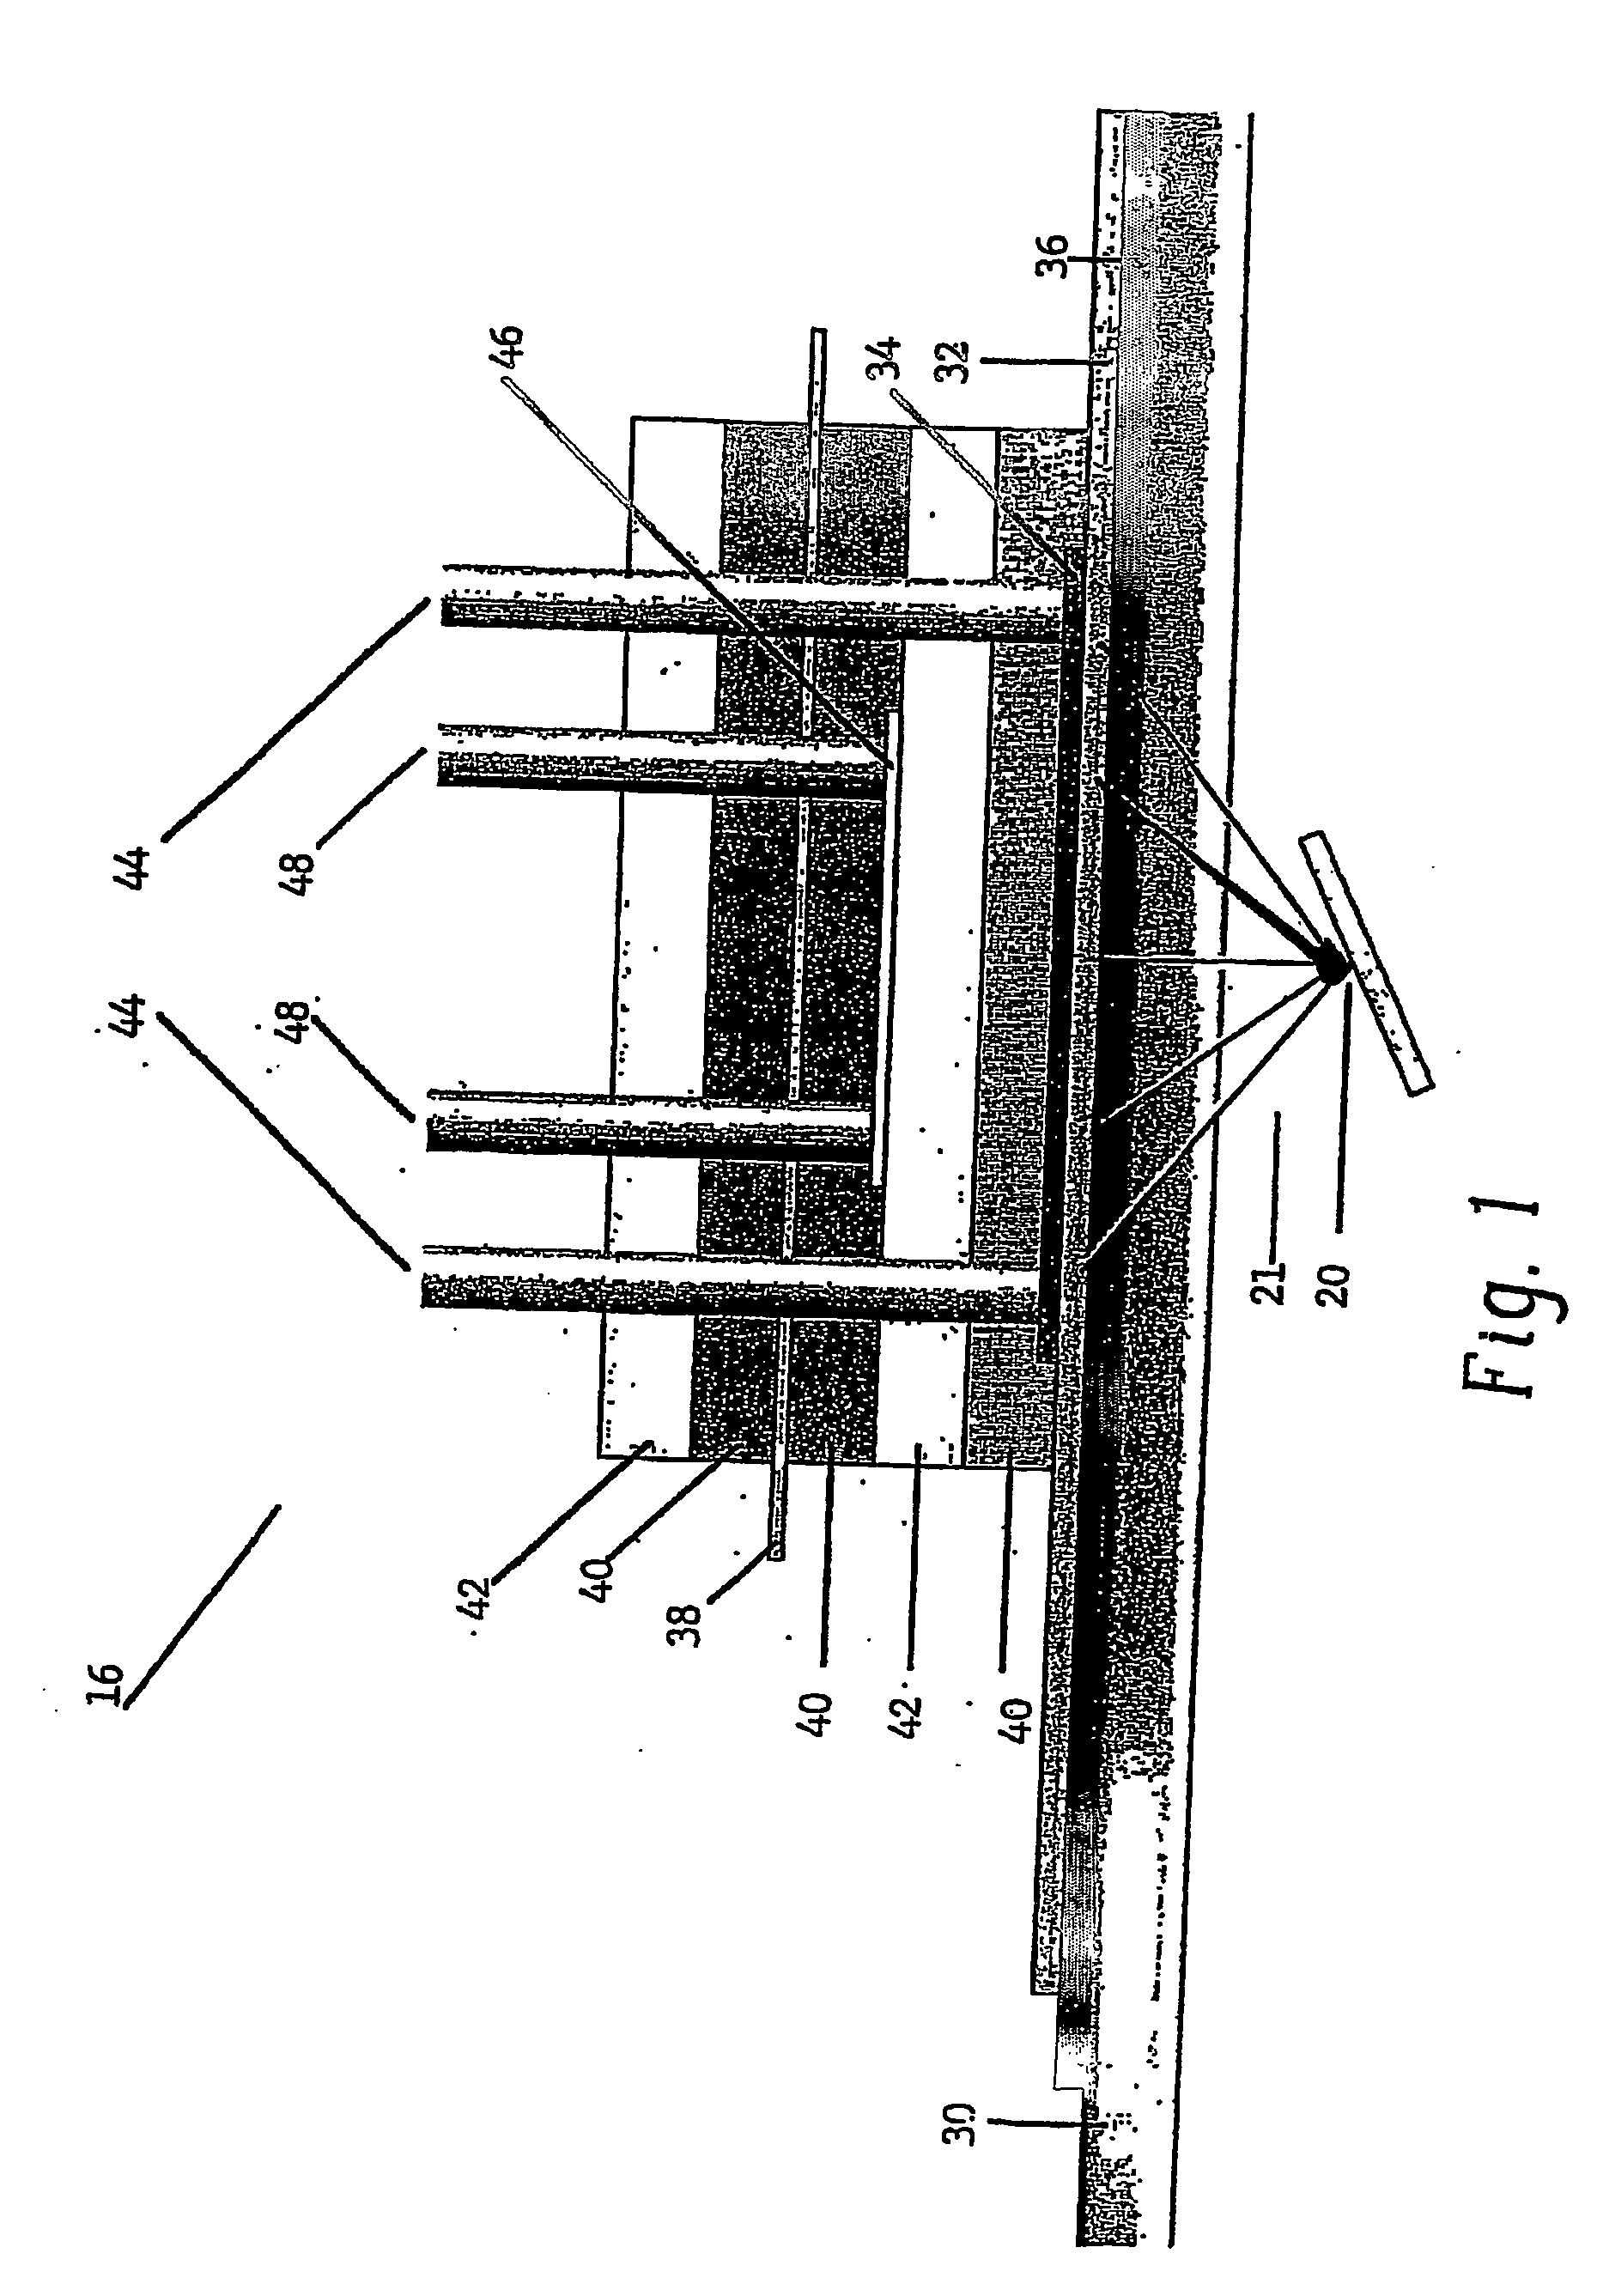 Photolytic oxygenator with carbon dioxide and/or hydrogen separation and fixation